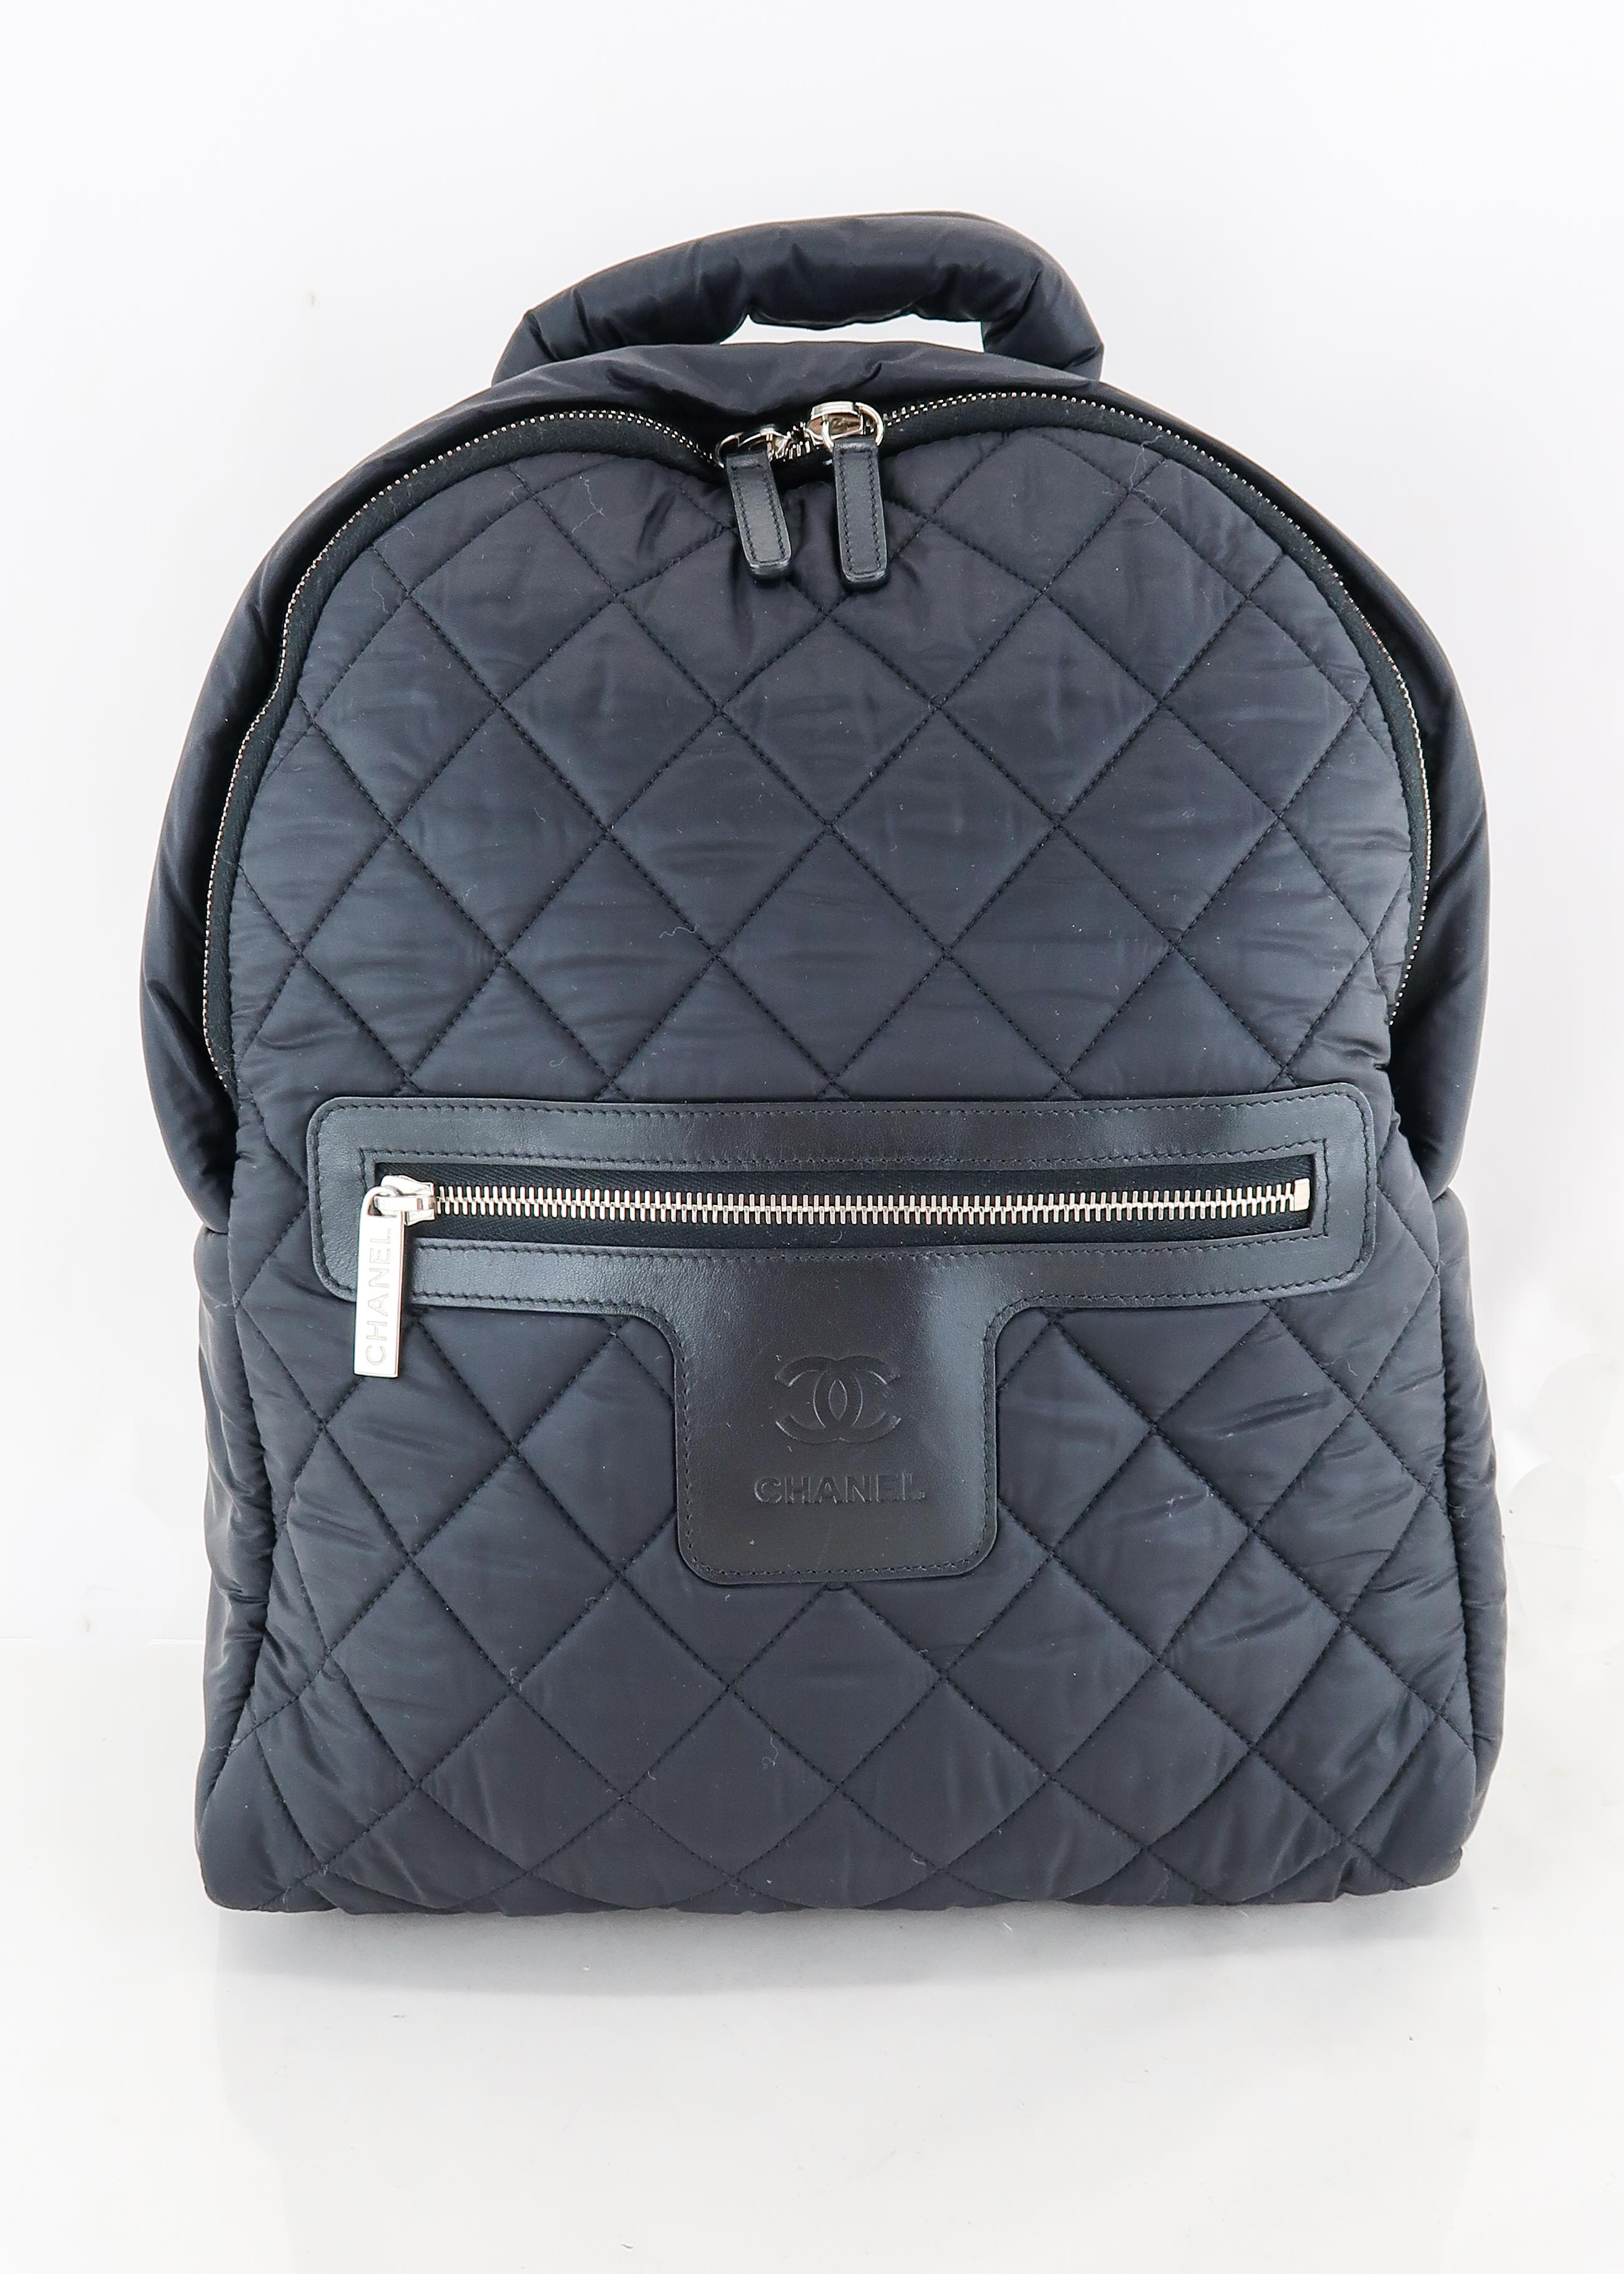 Authentic Chanel Nylon Back Pack